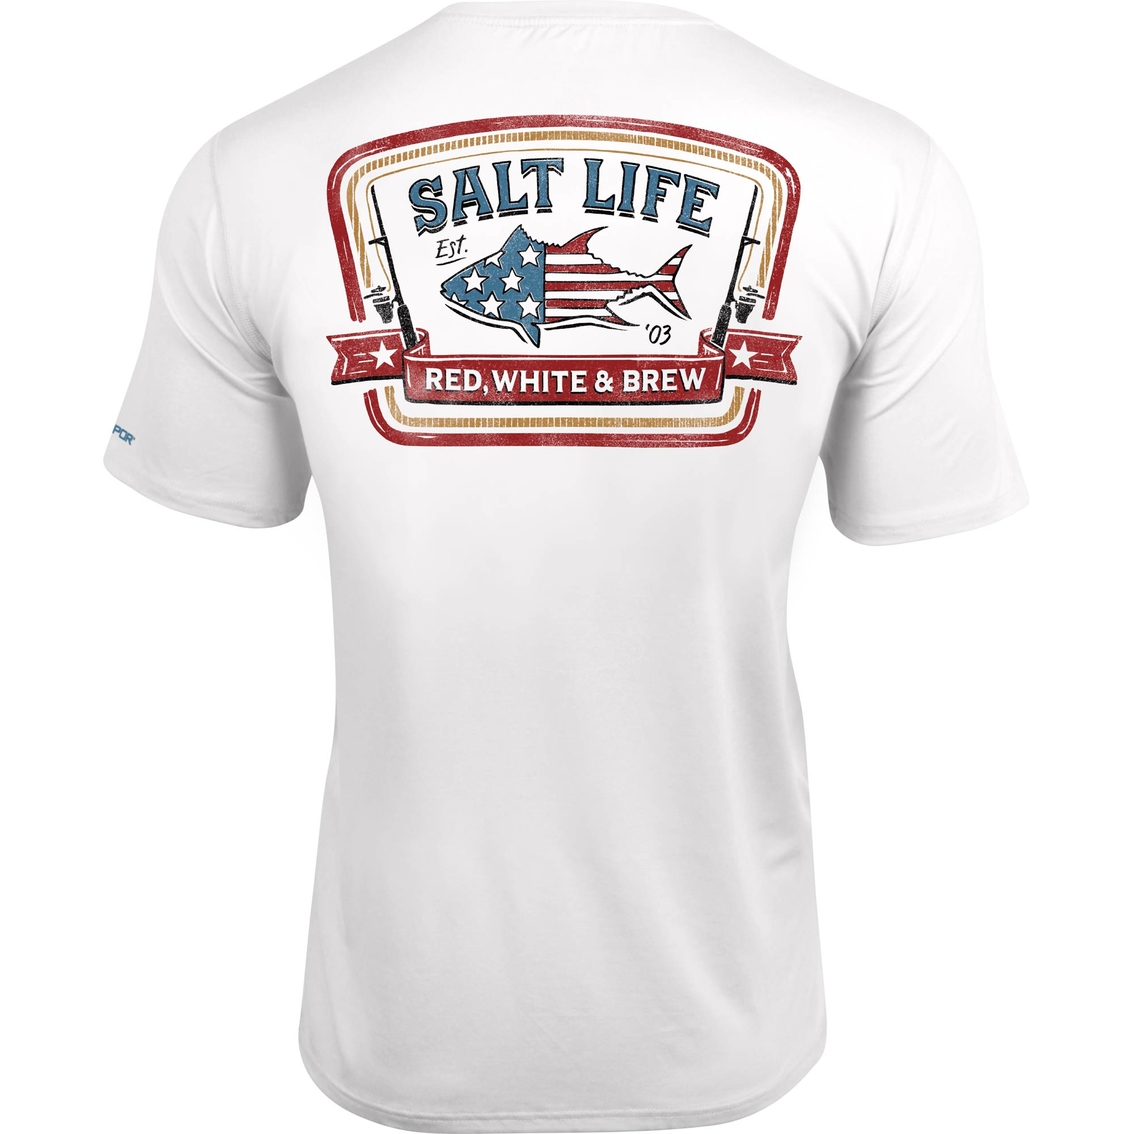 Salt Life Red White and Brew Performance Pocket Tee - Image 2 of 2